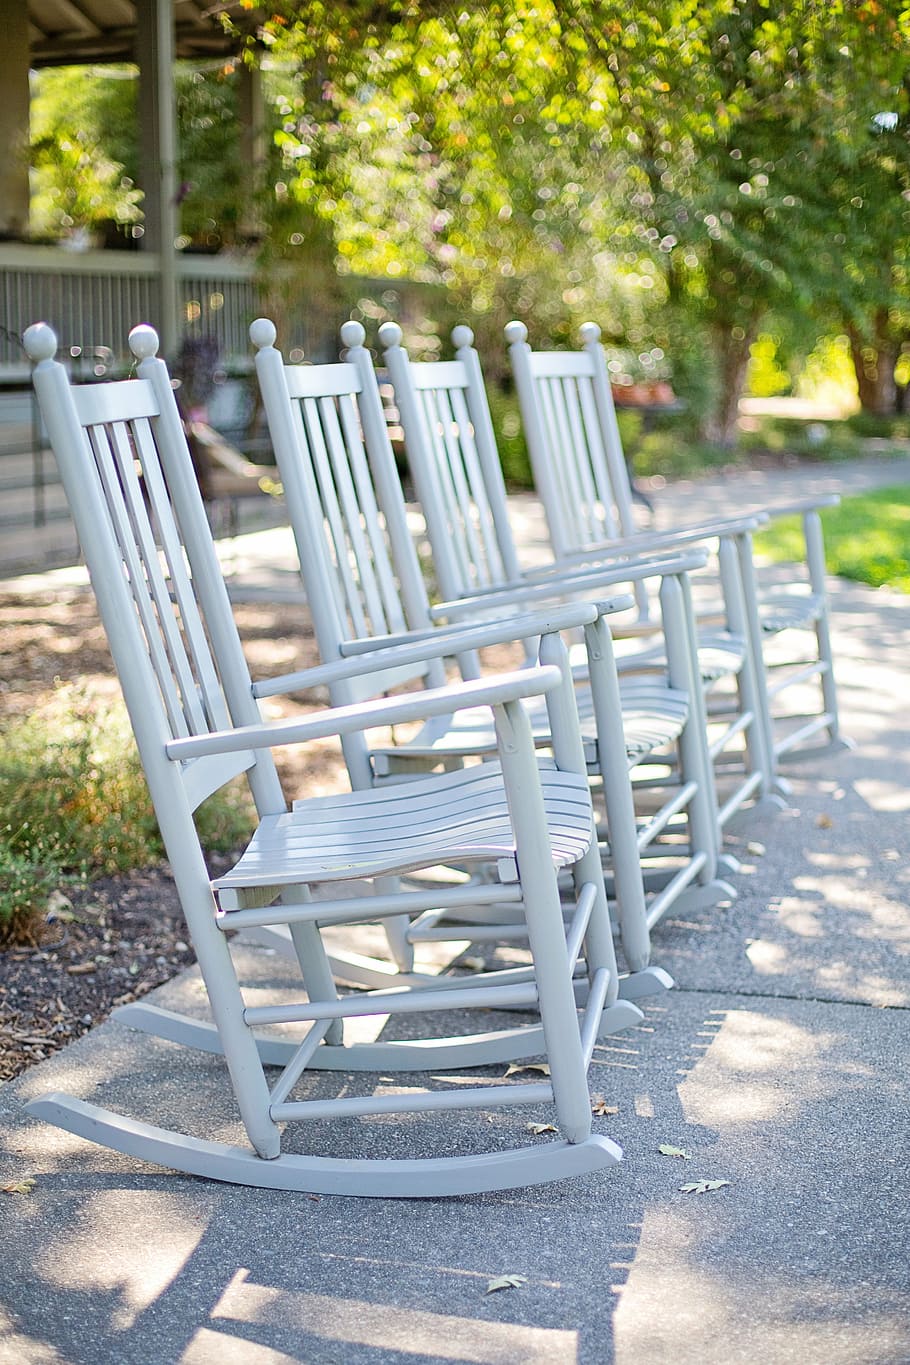 four, white, wooden, armchairs, rocking chairs, chairs, rockers, garden, outdoors, chair